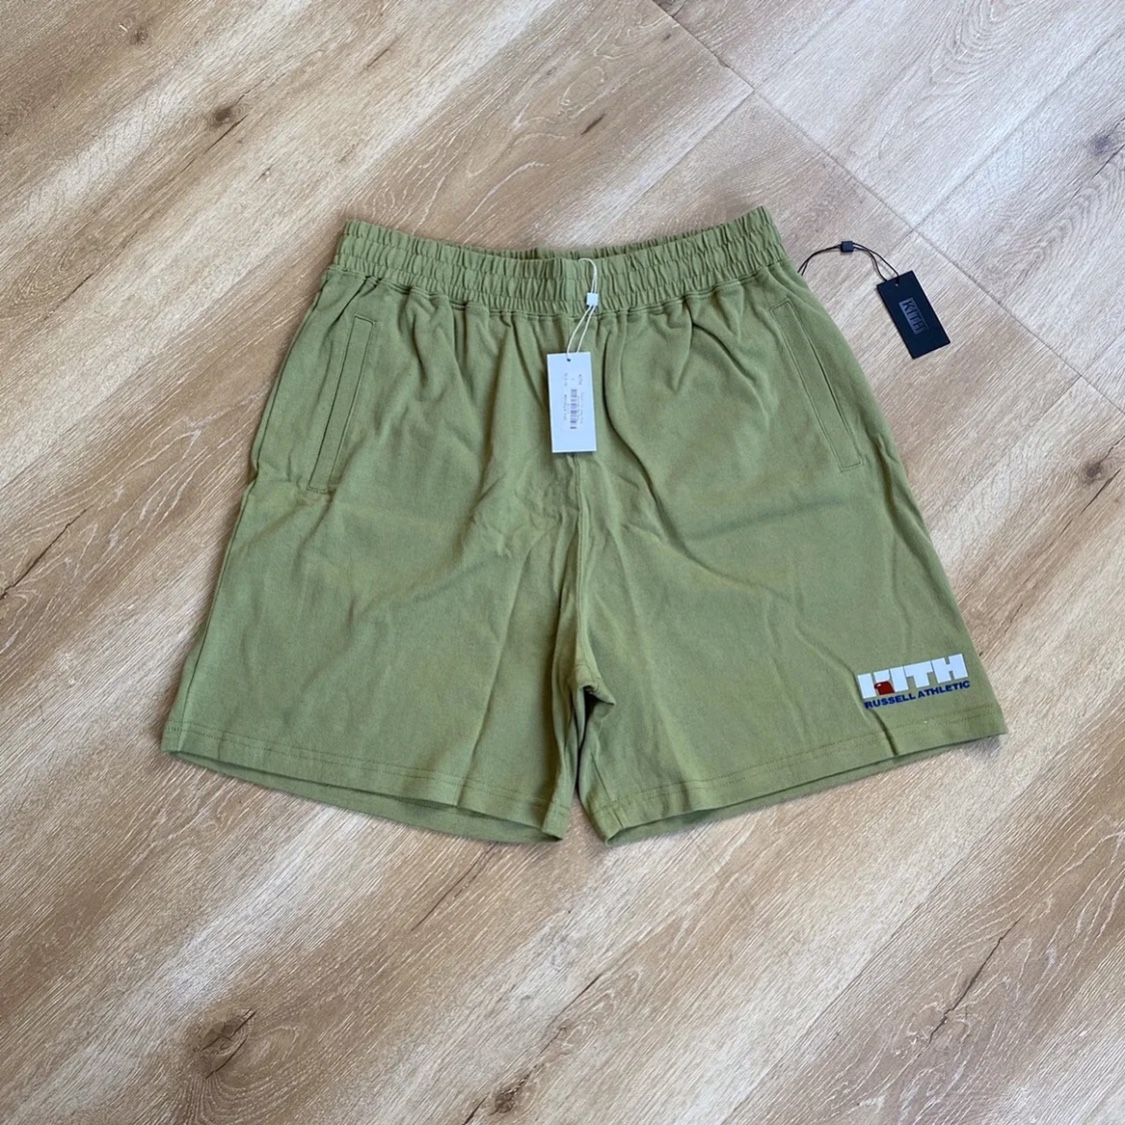 Green [Larger]half sell half give kith jointly russell rainbow Macaroon Color matching easy leisure time shorts men and women with system